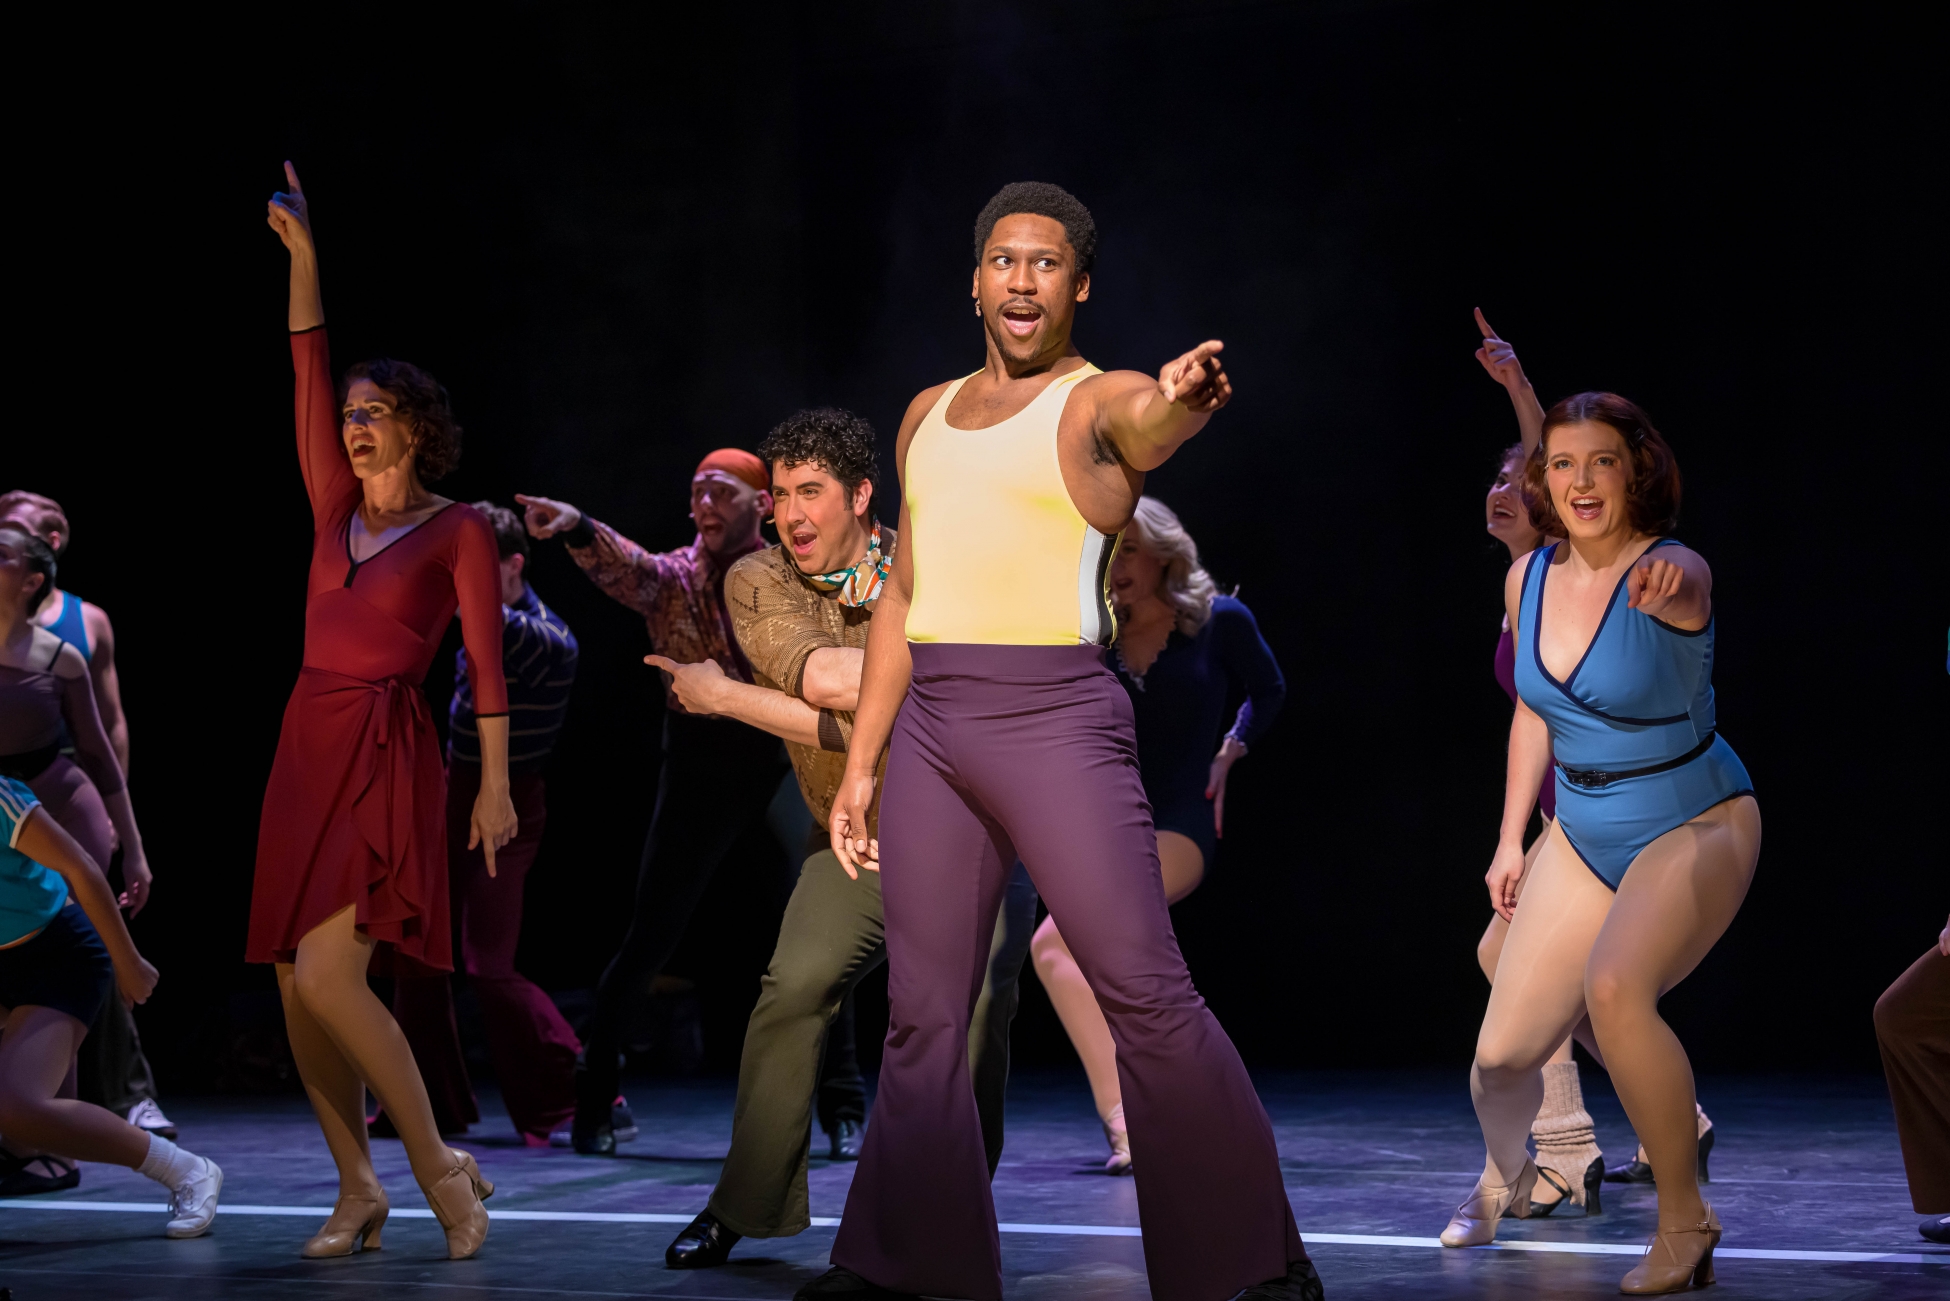 Michael Charles as Richie and several other auditioners in A Chorus Line point.